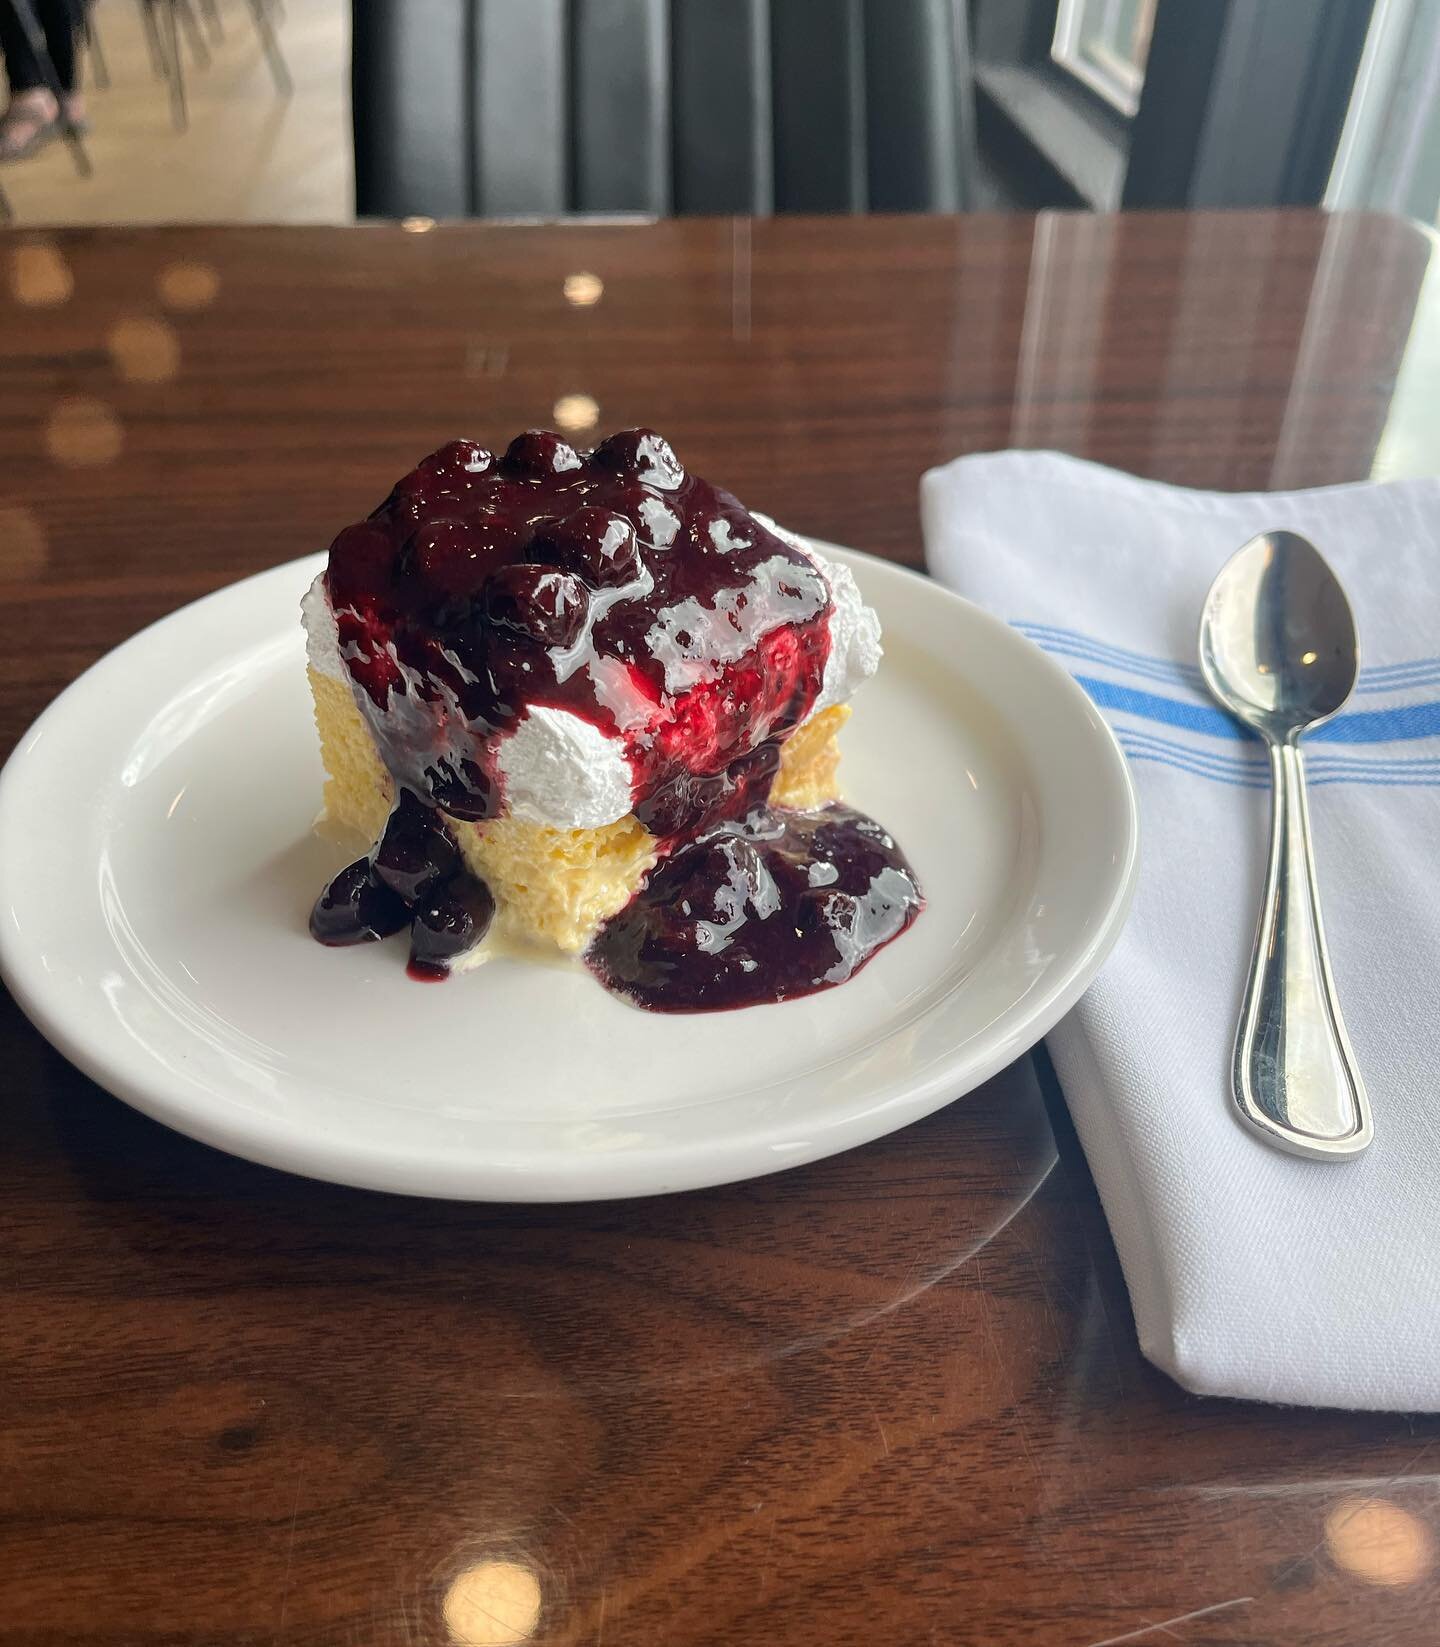 While we take a break from our Basque Cheesecake, this Tres Leches cake with our homemade blueberry compote is to die for!! Stop by this weekend to try one!